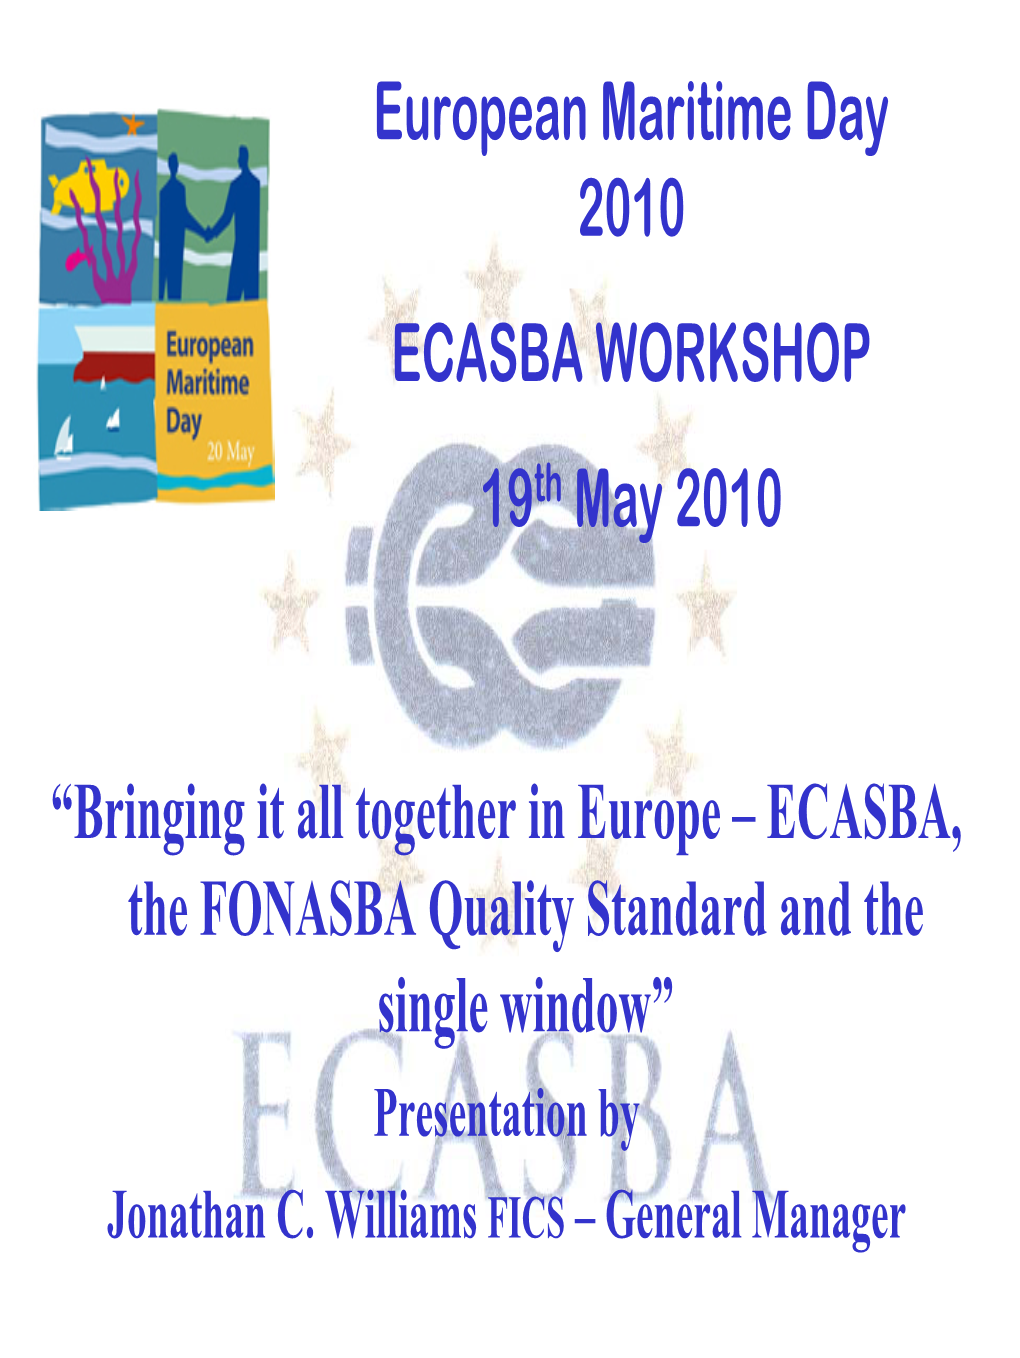 Bringing It All Together, ECASBA, the FONASBA Quality Standard and The